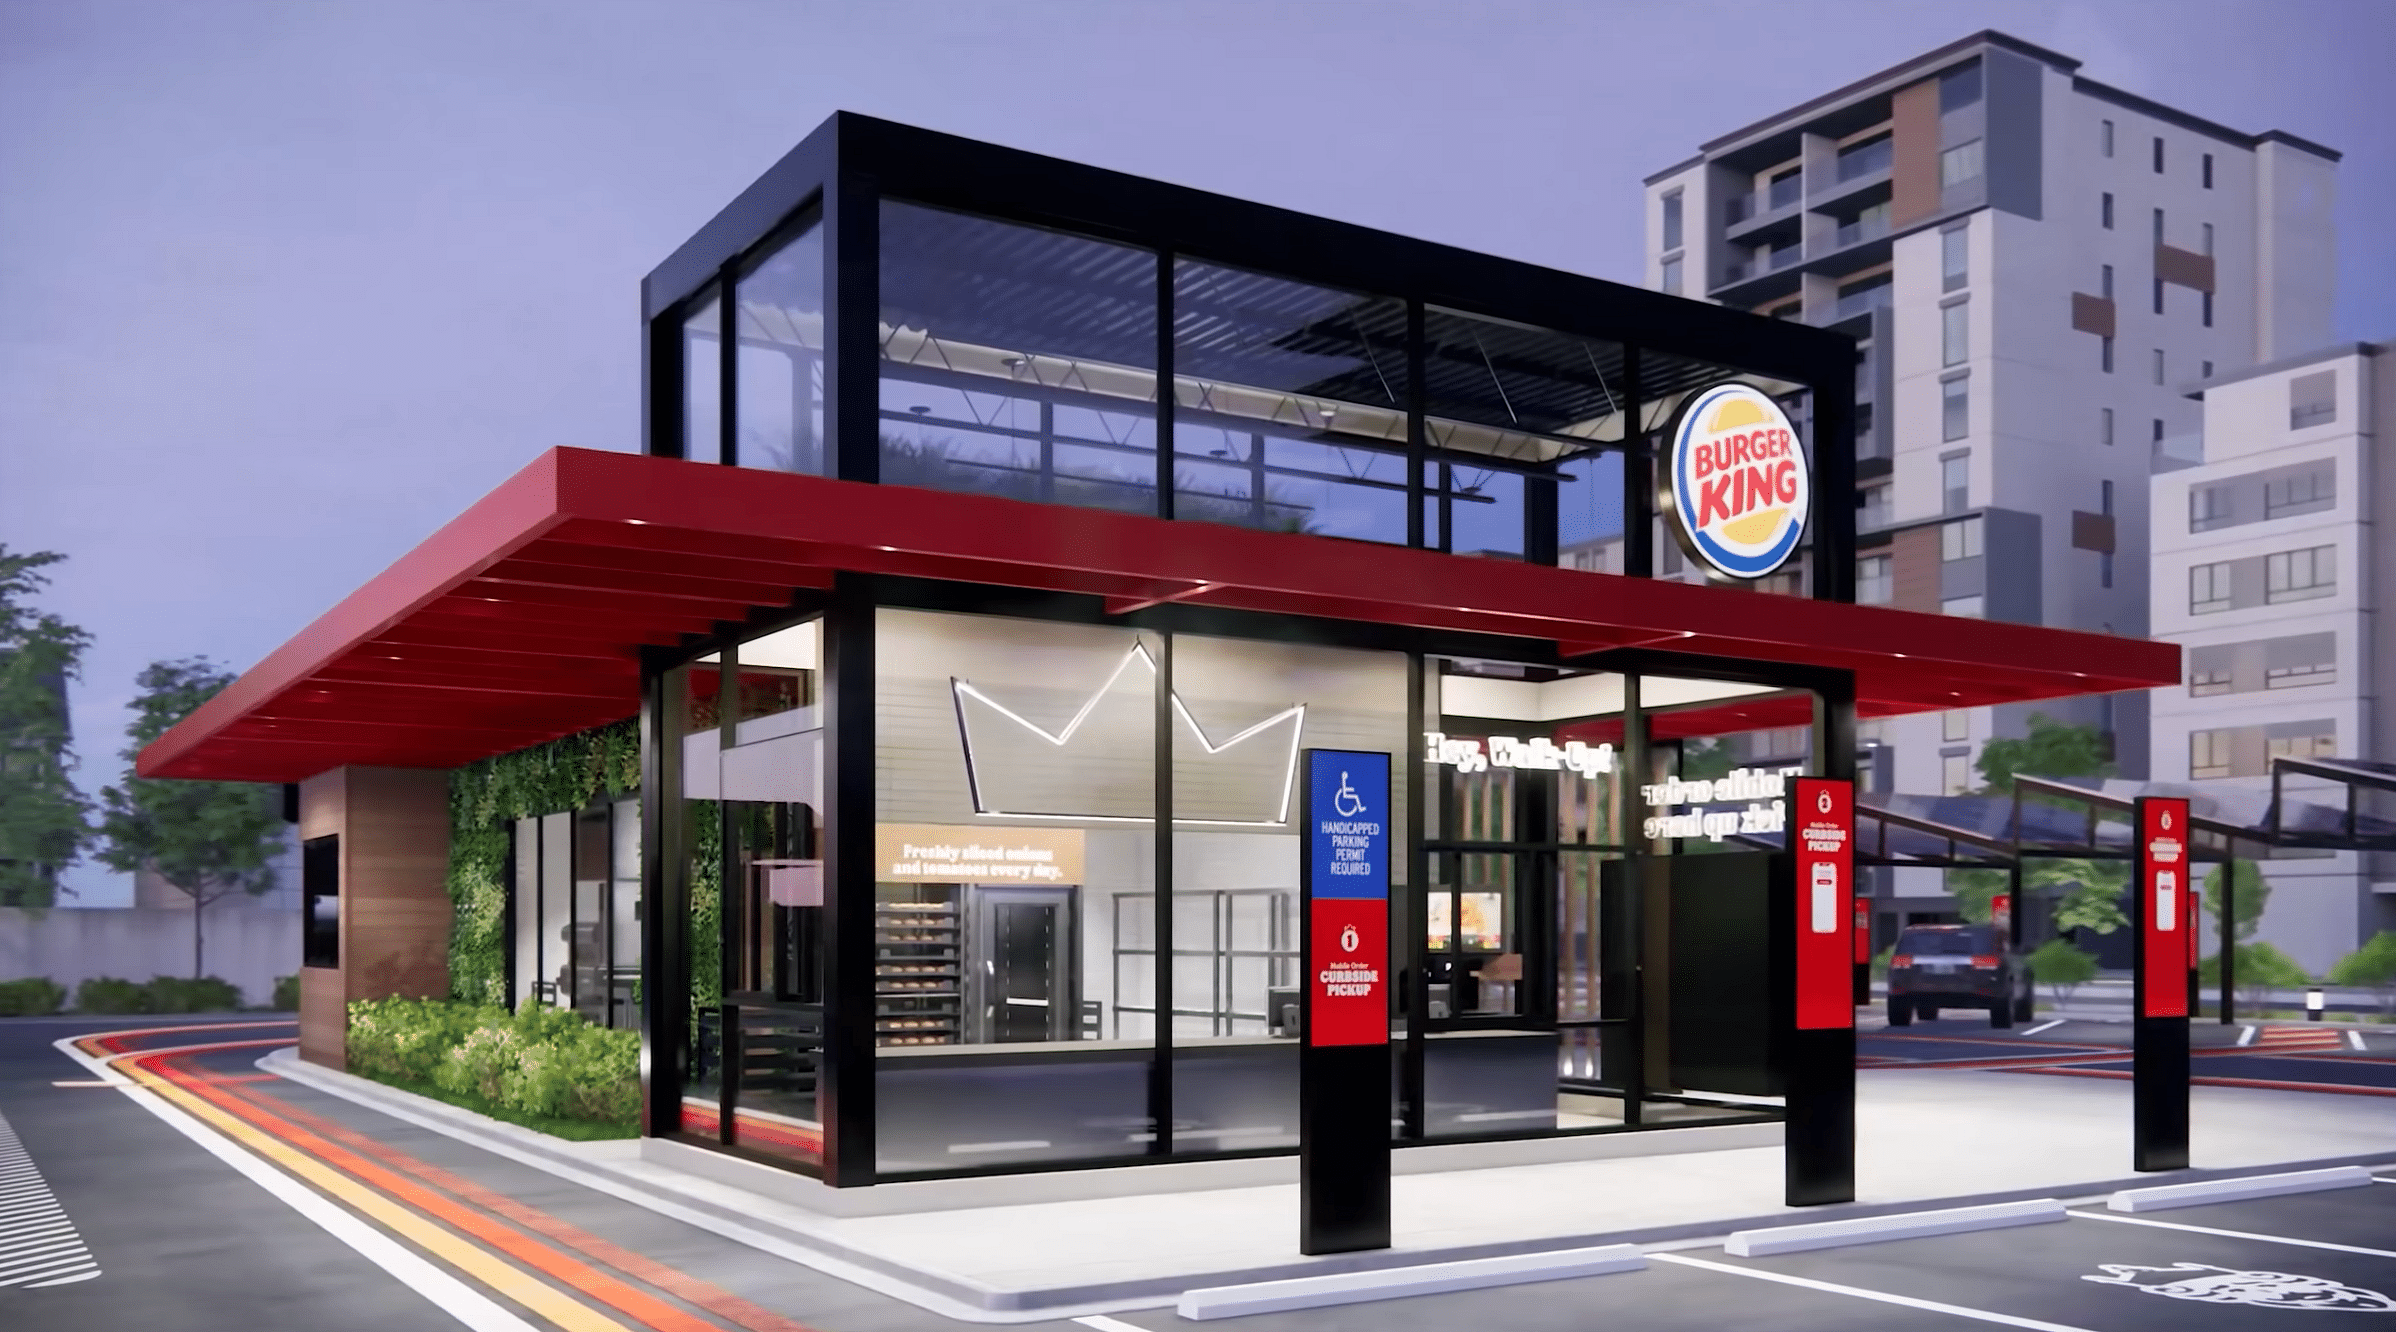 Burger King unveils new logo in brand redesign